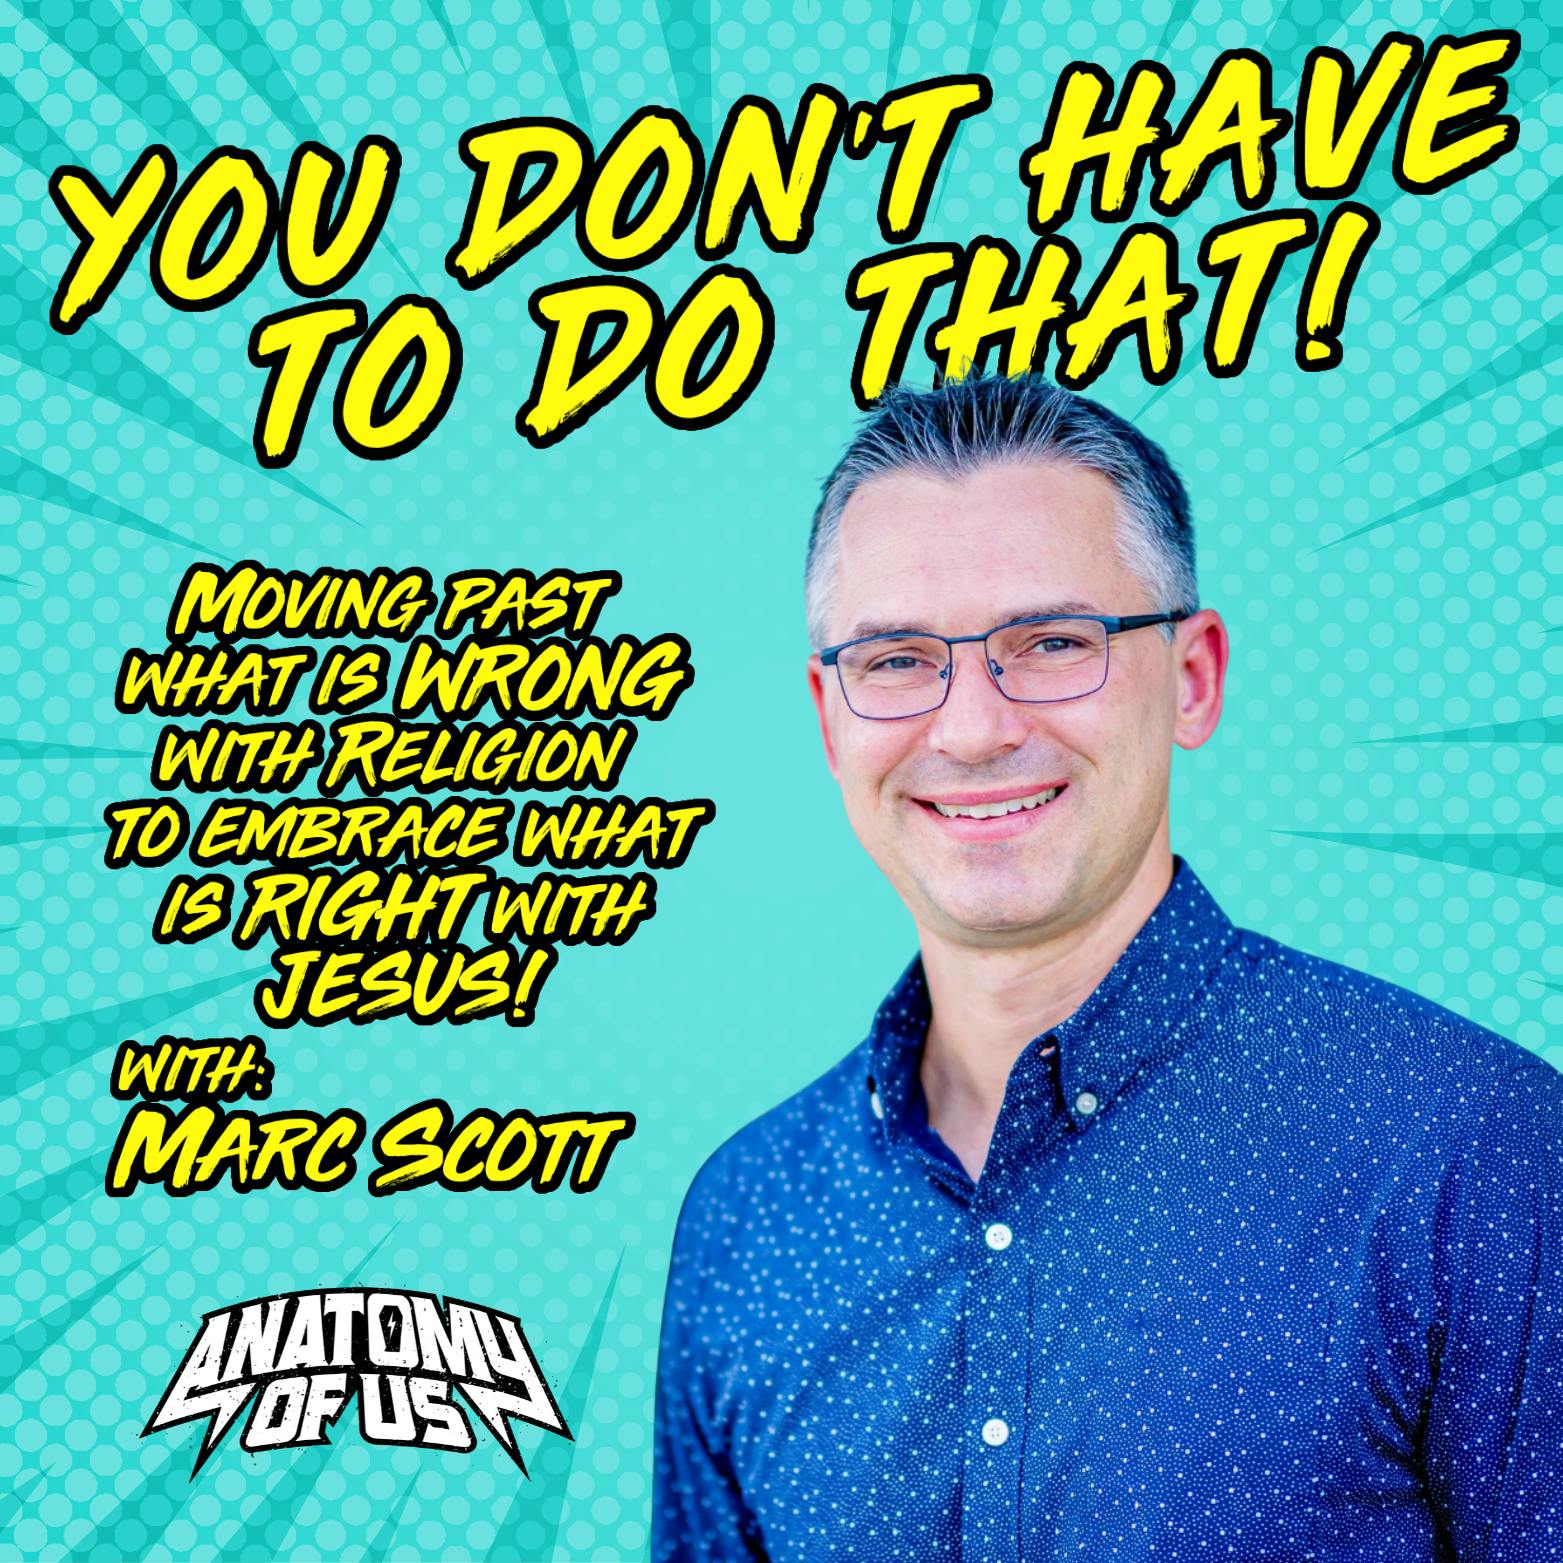 You Don't Have to Do That! with Author Marc Scott